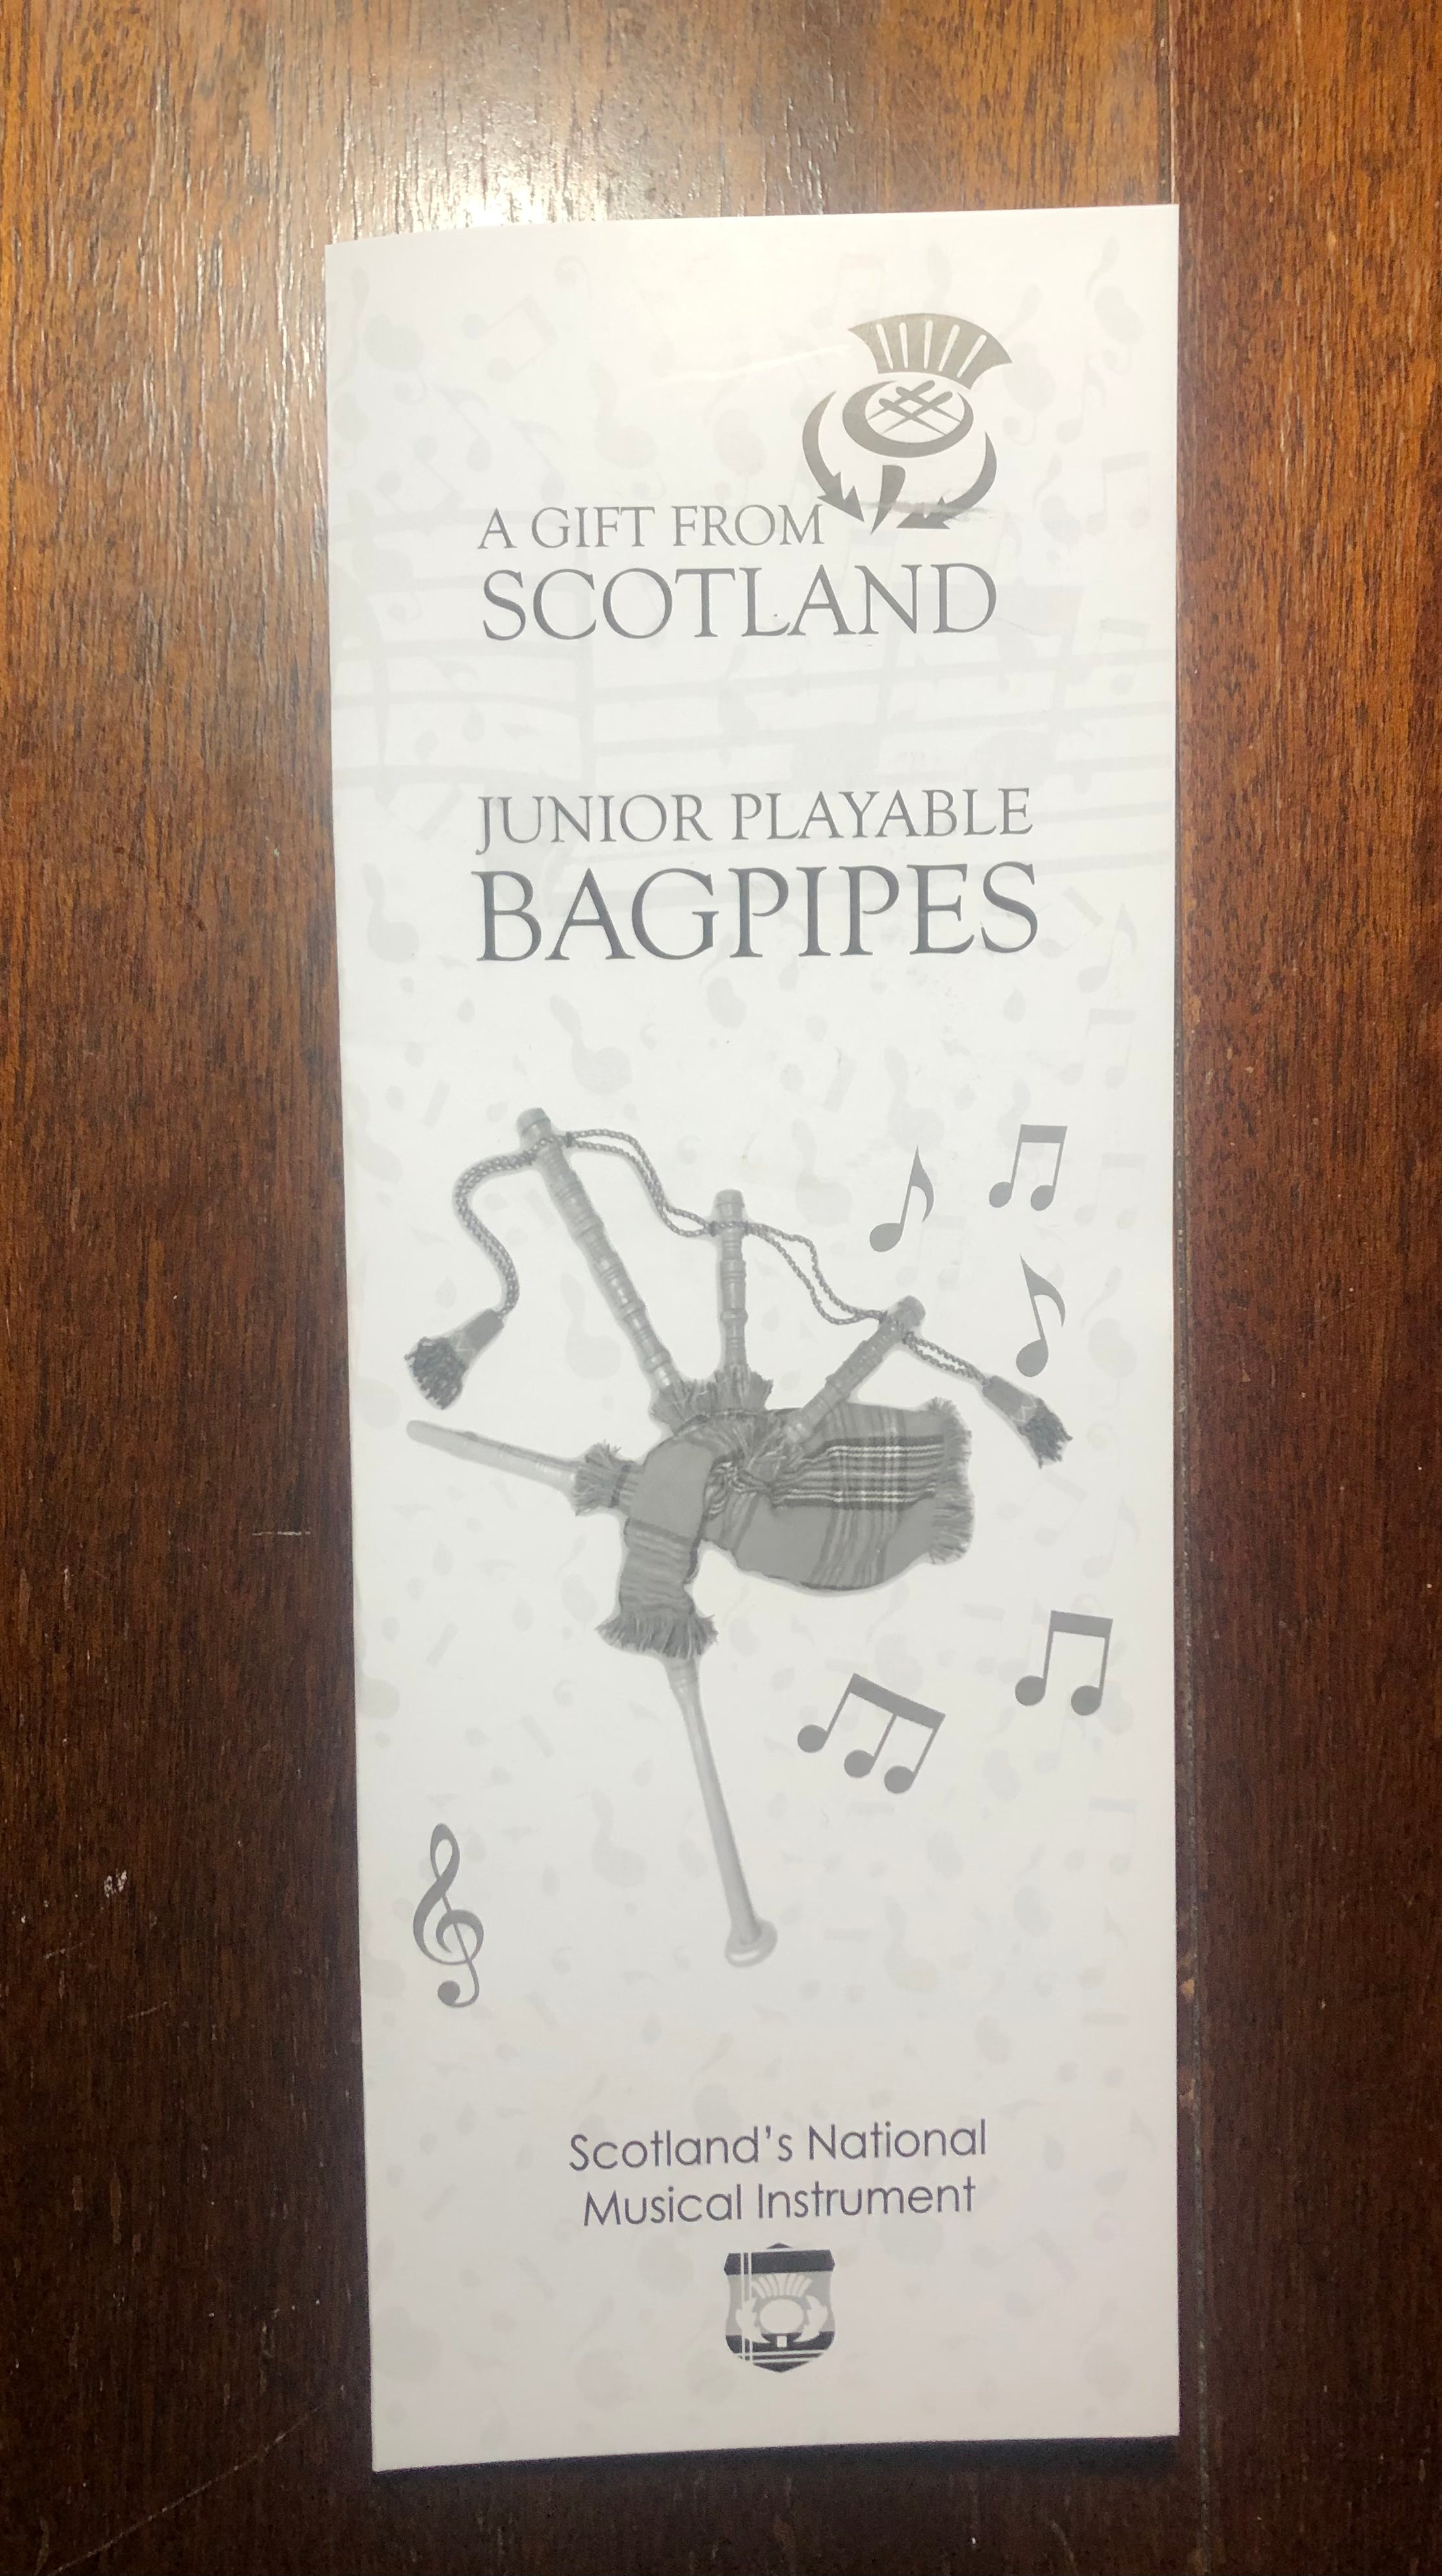 Junior playable bagpipes